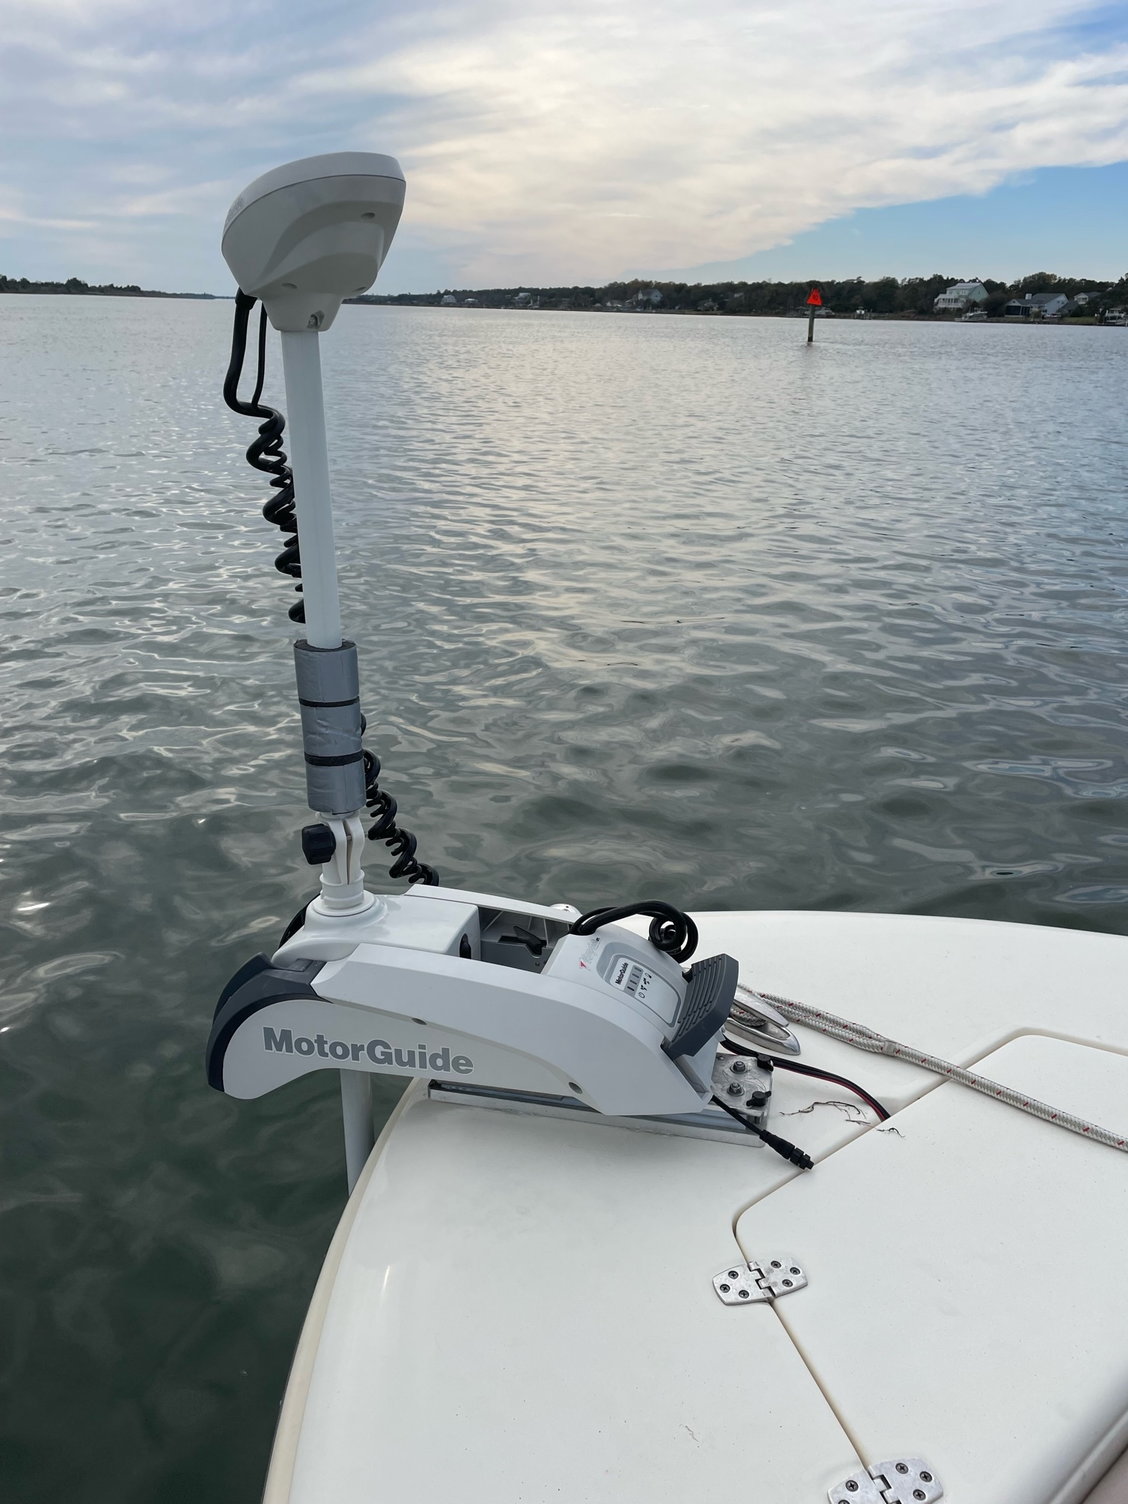 Choosing an unobtrusive trolling motor - The Hull Truth - Boating and  Fishing Forum